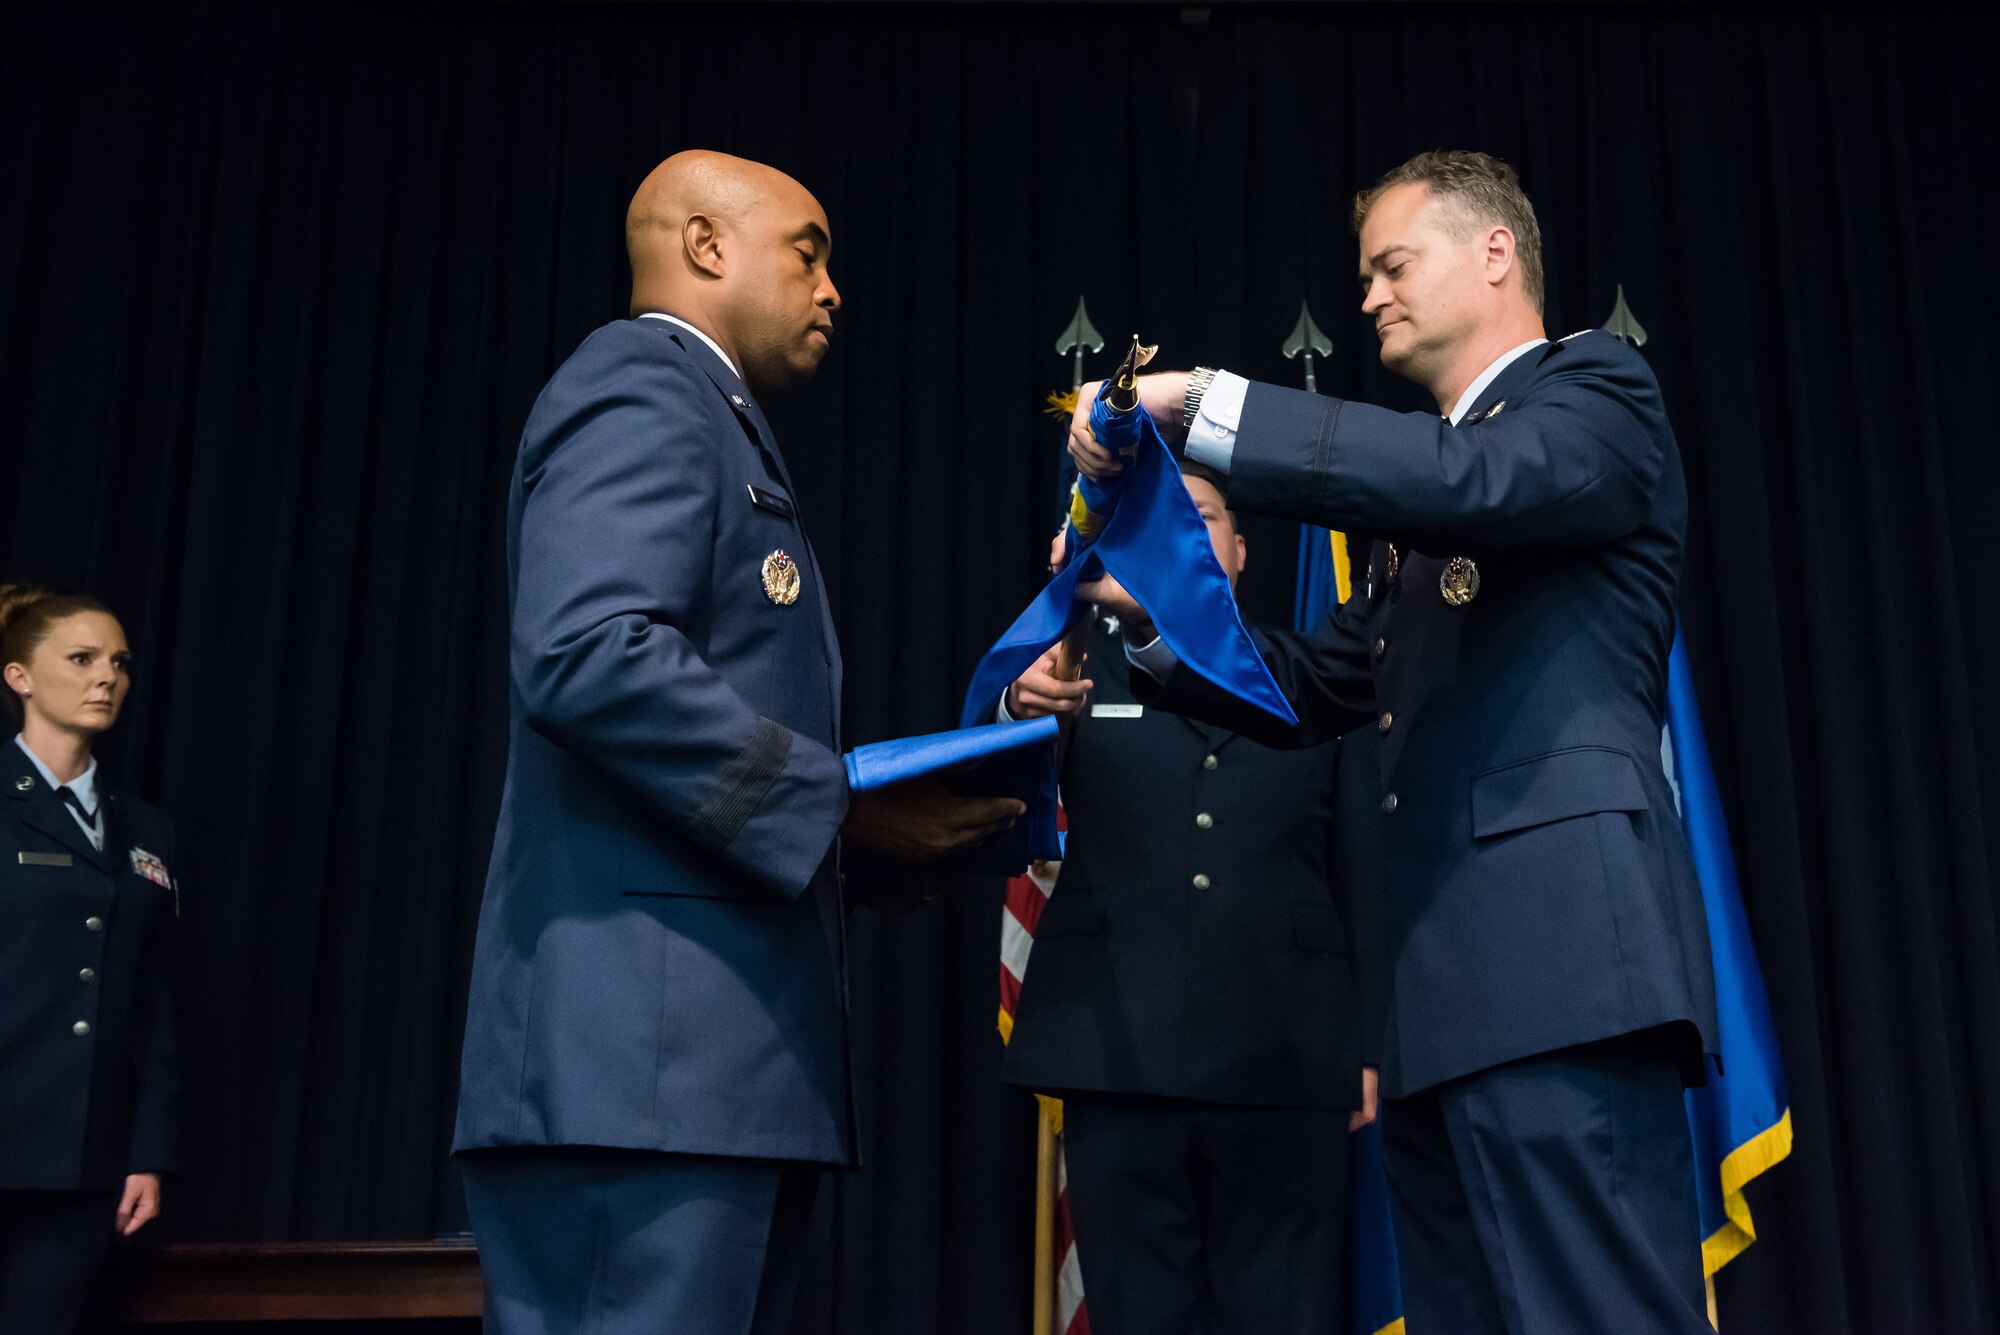 Brig. Gen. Trent Edwards, 37th Training Wing commander, Joint Base San Antonio-Lackland, Texas, prepares to sheath a guidon from Col. Steven Cabosky, Air Advisor Academy commandant, during an inactivation ceremony in the Air Advisor Academy at Joint Base McGuire-Dix-Lakehurst, N.J., July 10, 2015. The U.S. Air Force Expeditionary Center officially assumed the responsibility of being the Air Force's sole provider of training for general purpose force Air Advisors. (U.S. Air Force photo by Russ Meseroll/Released)